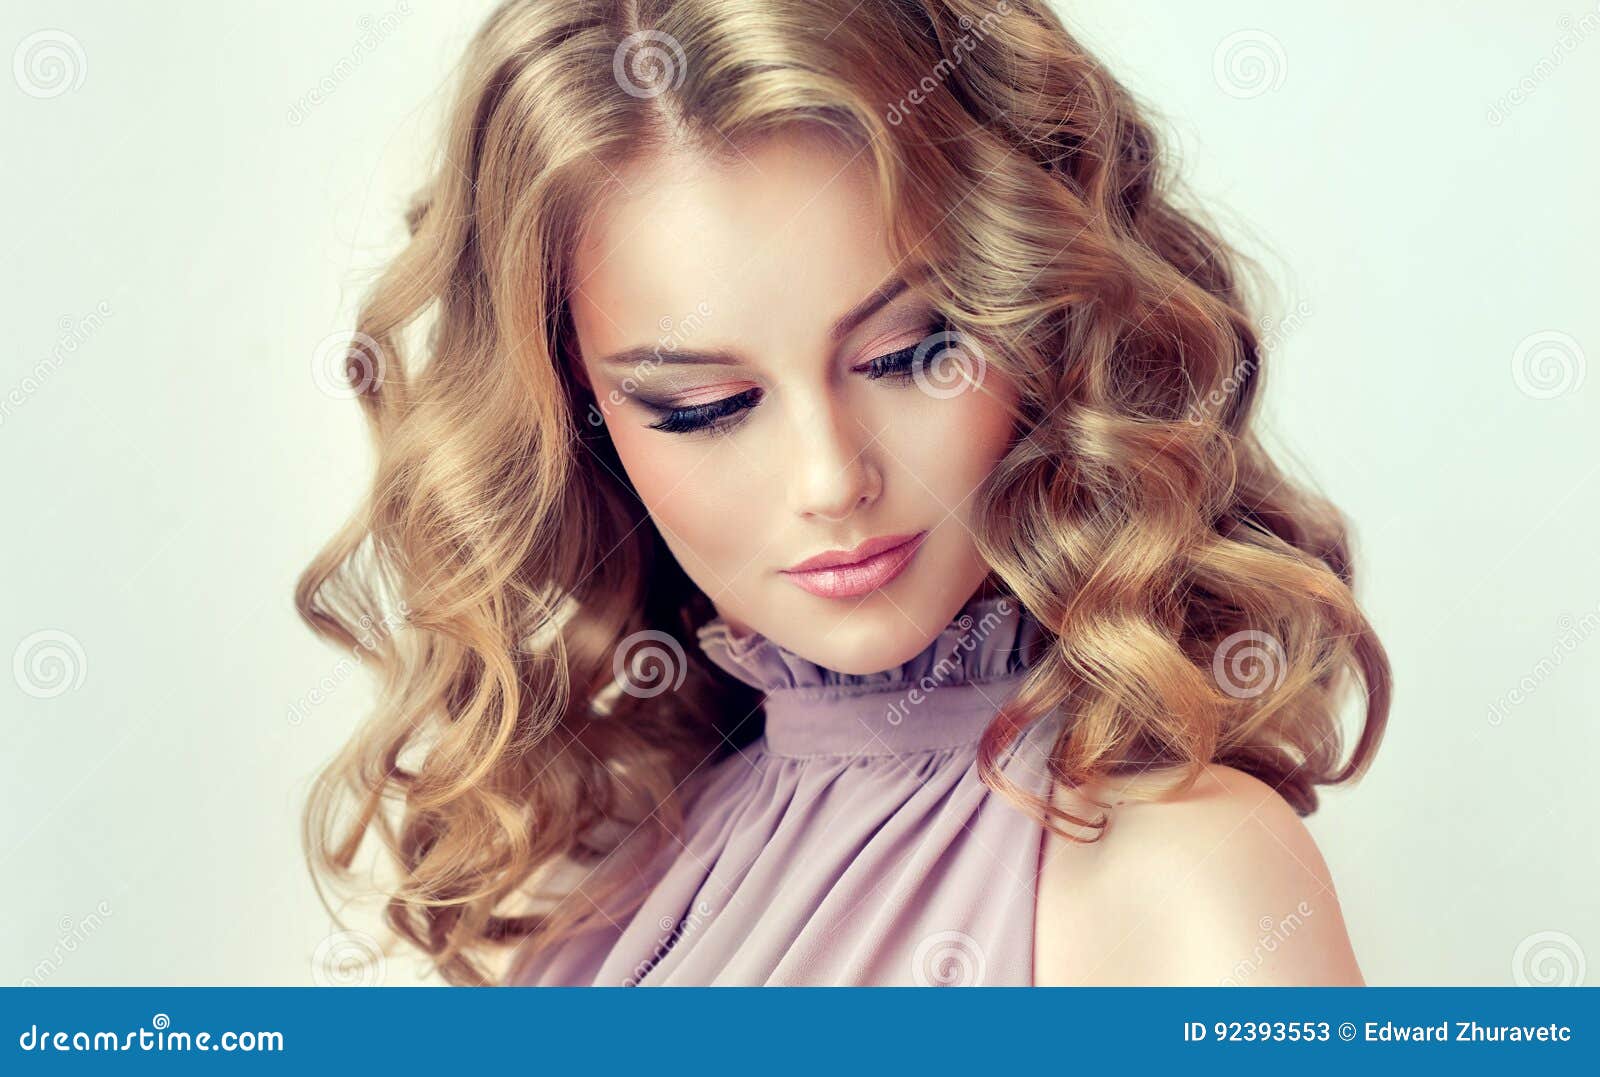 Attractive Woman Blonde With Middle Length Dense And Curly